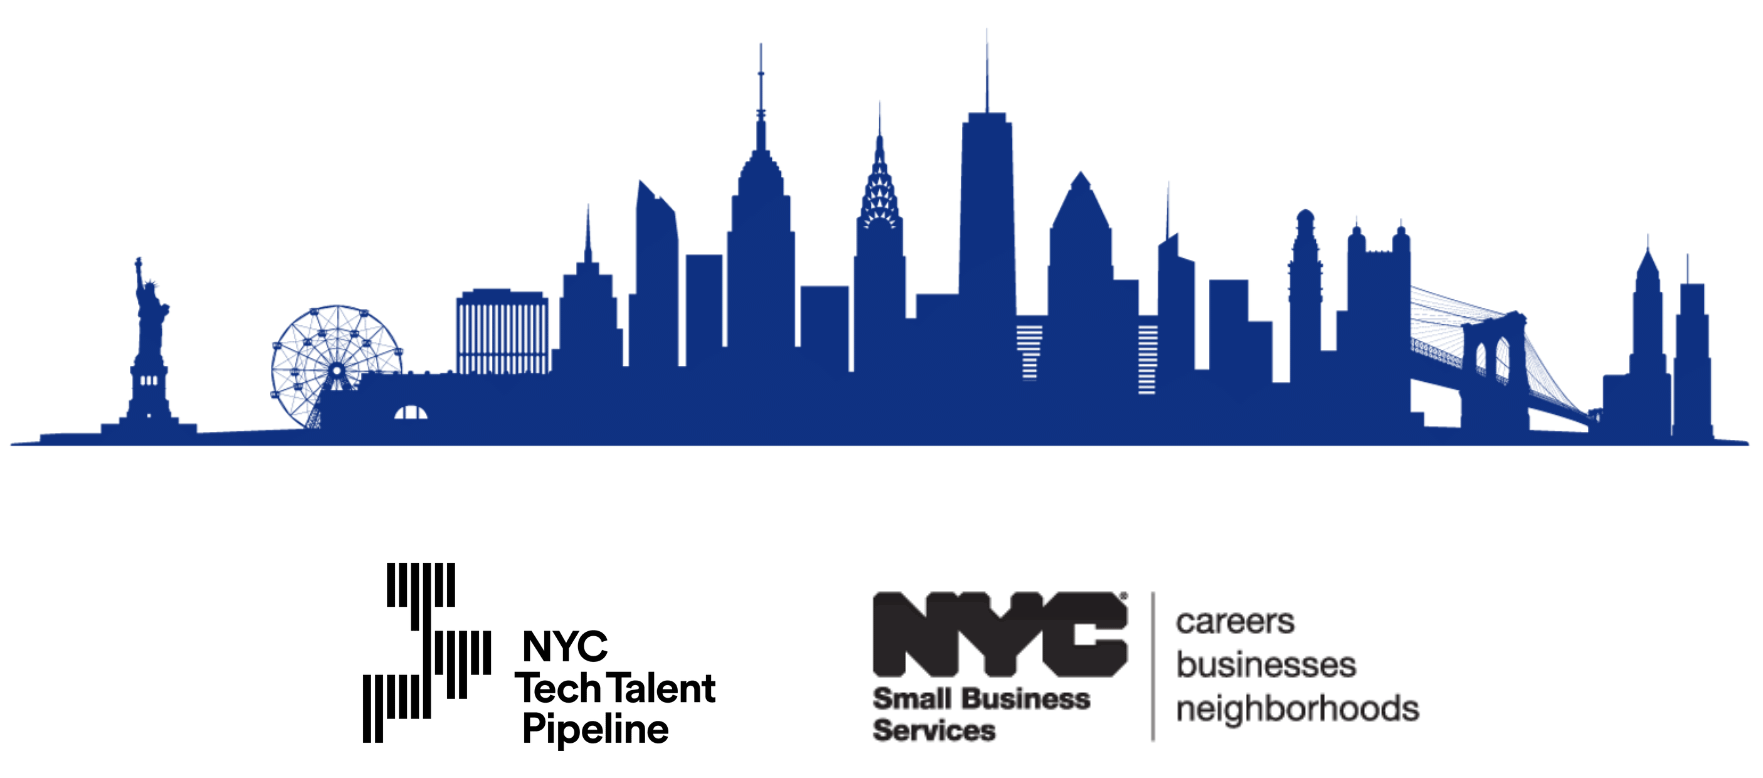 NYC Skyline and Logos from City of New York